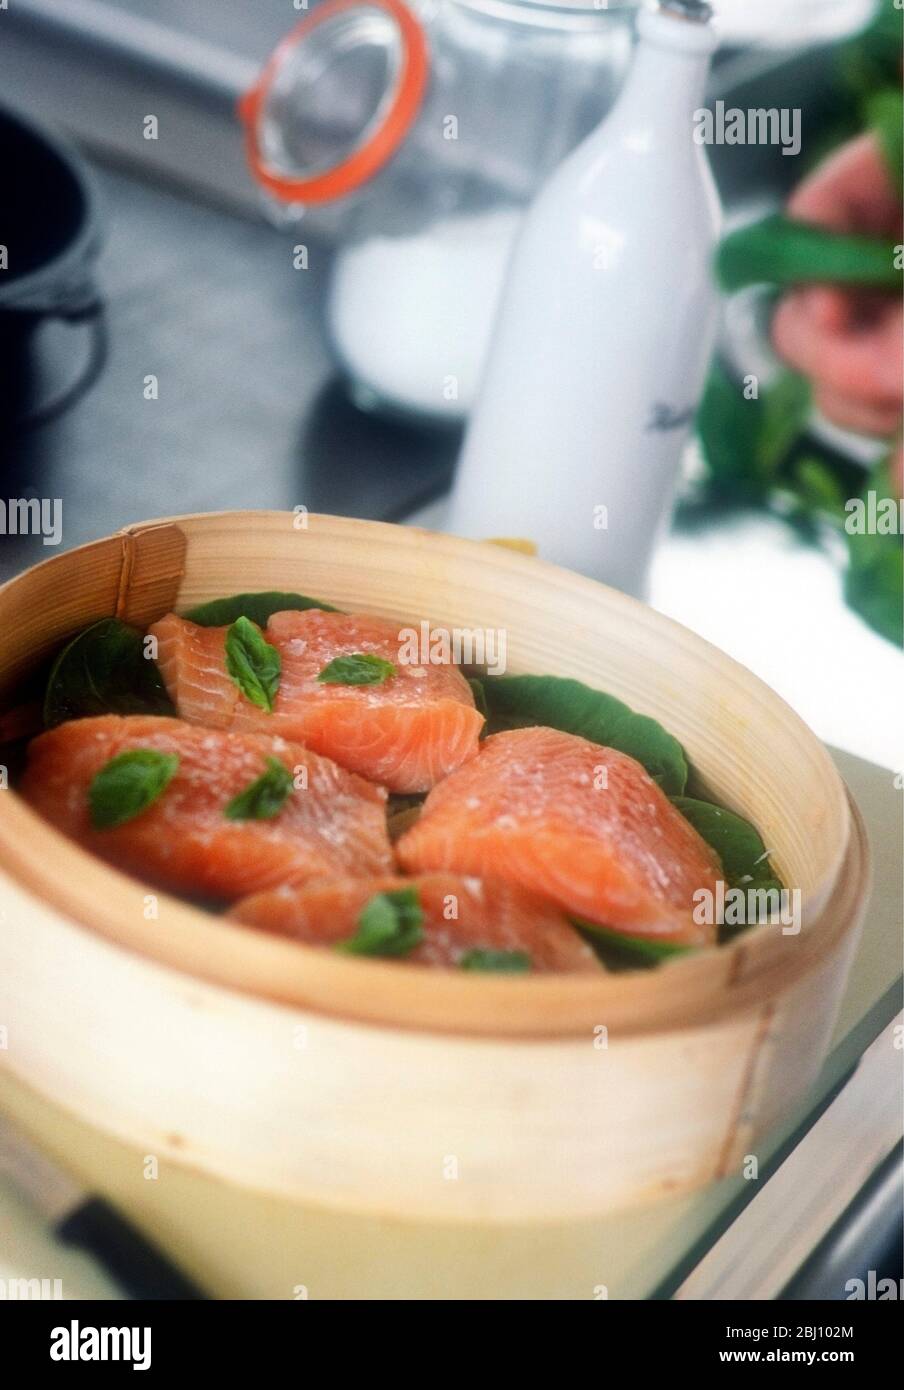 Salmon fillets set to steam on bed of spinach with basil leaves in kitchen setting - Stock Photo